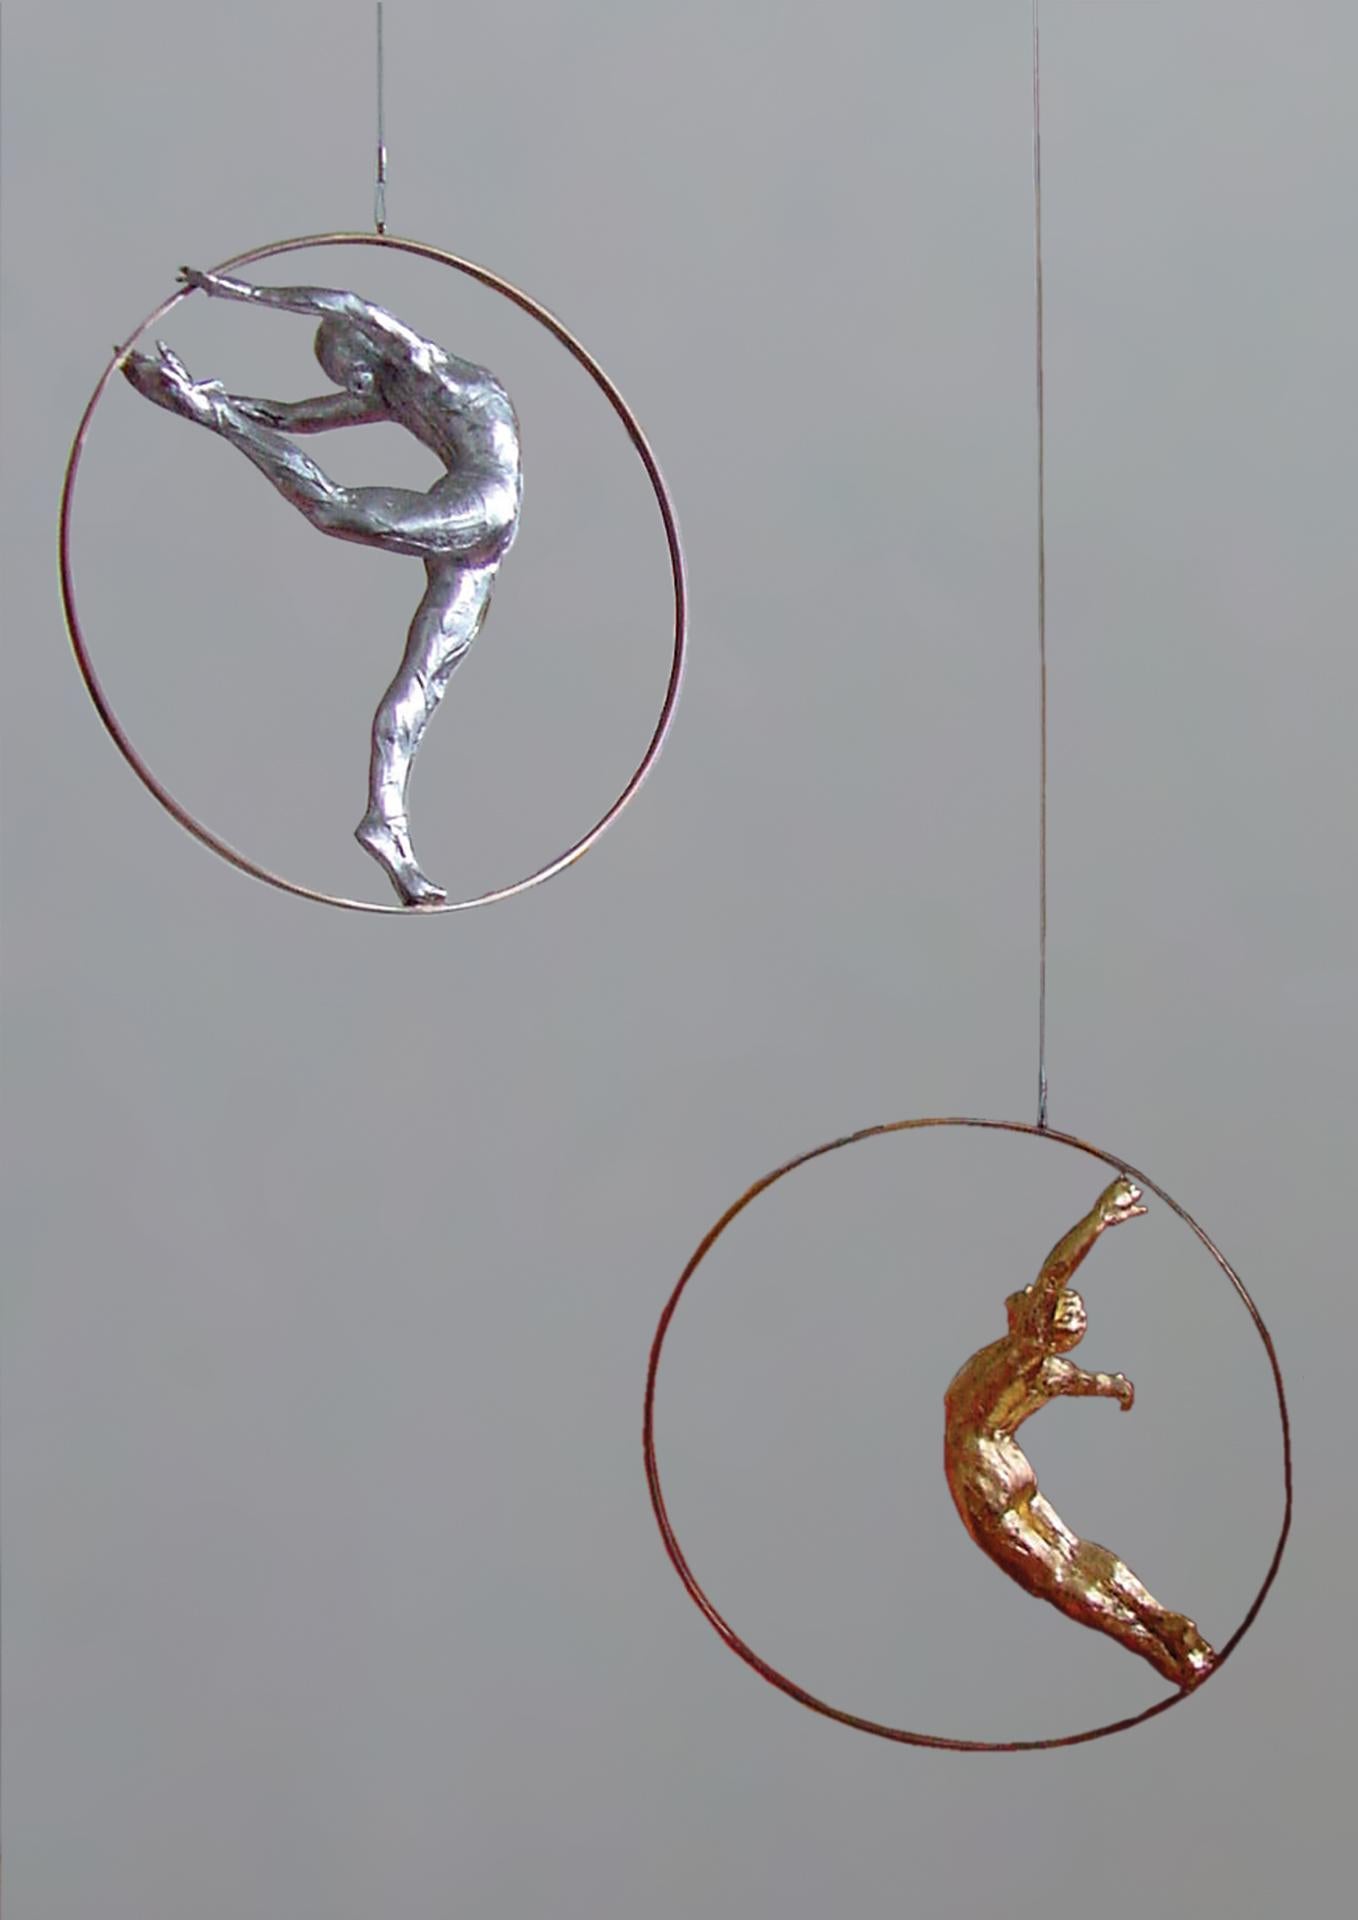 Denny Haskew Figurative Sculpture - Dance Within - Wear Only Sky (suspended)